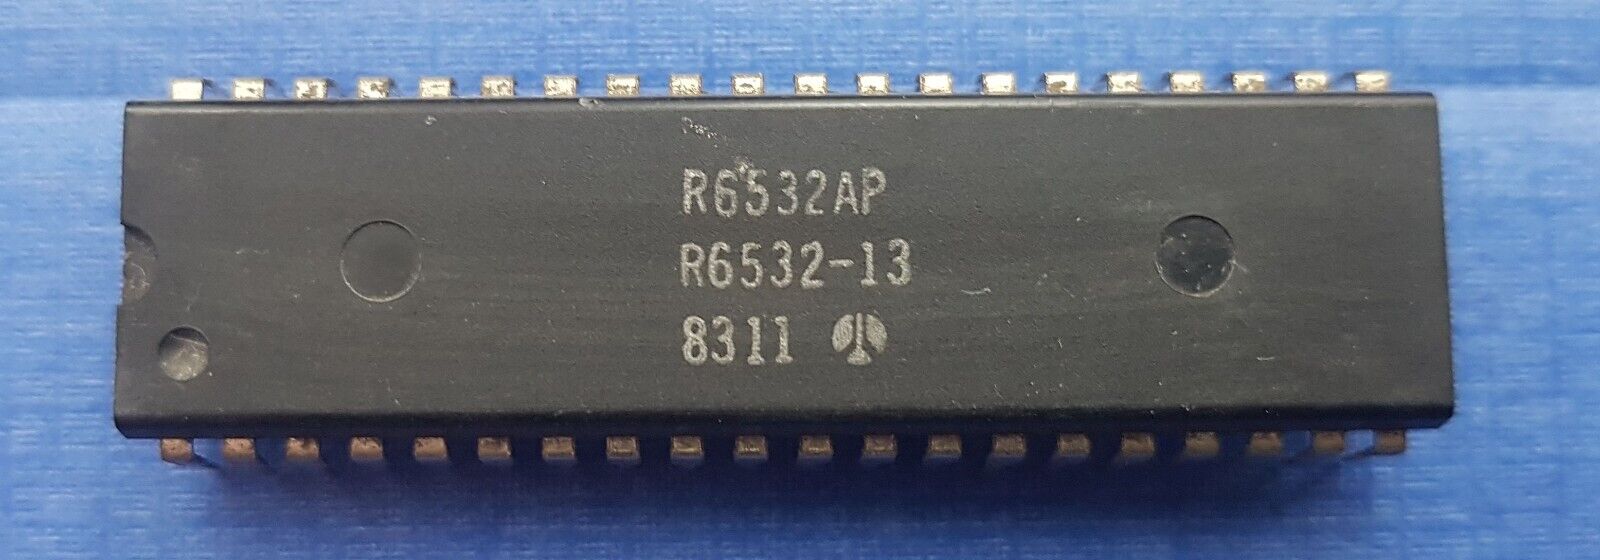 Rockwell R 6532 AP / R 6532-13 RAM- I/O Timer, RIOT Chip for COMMODORE SFD-1001